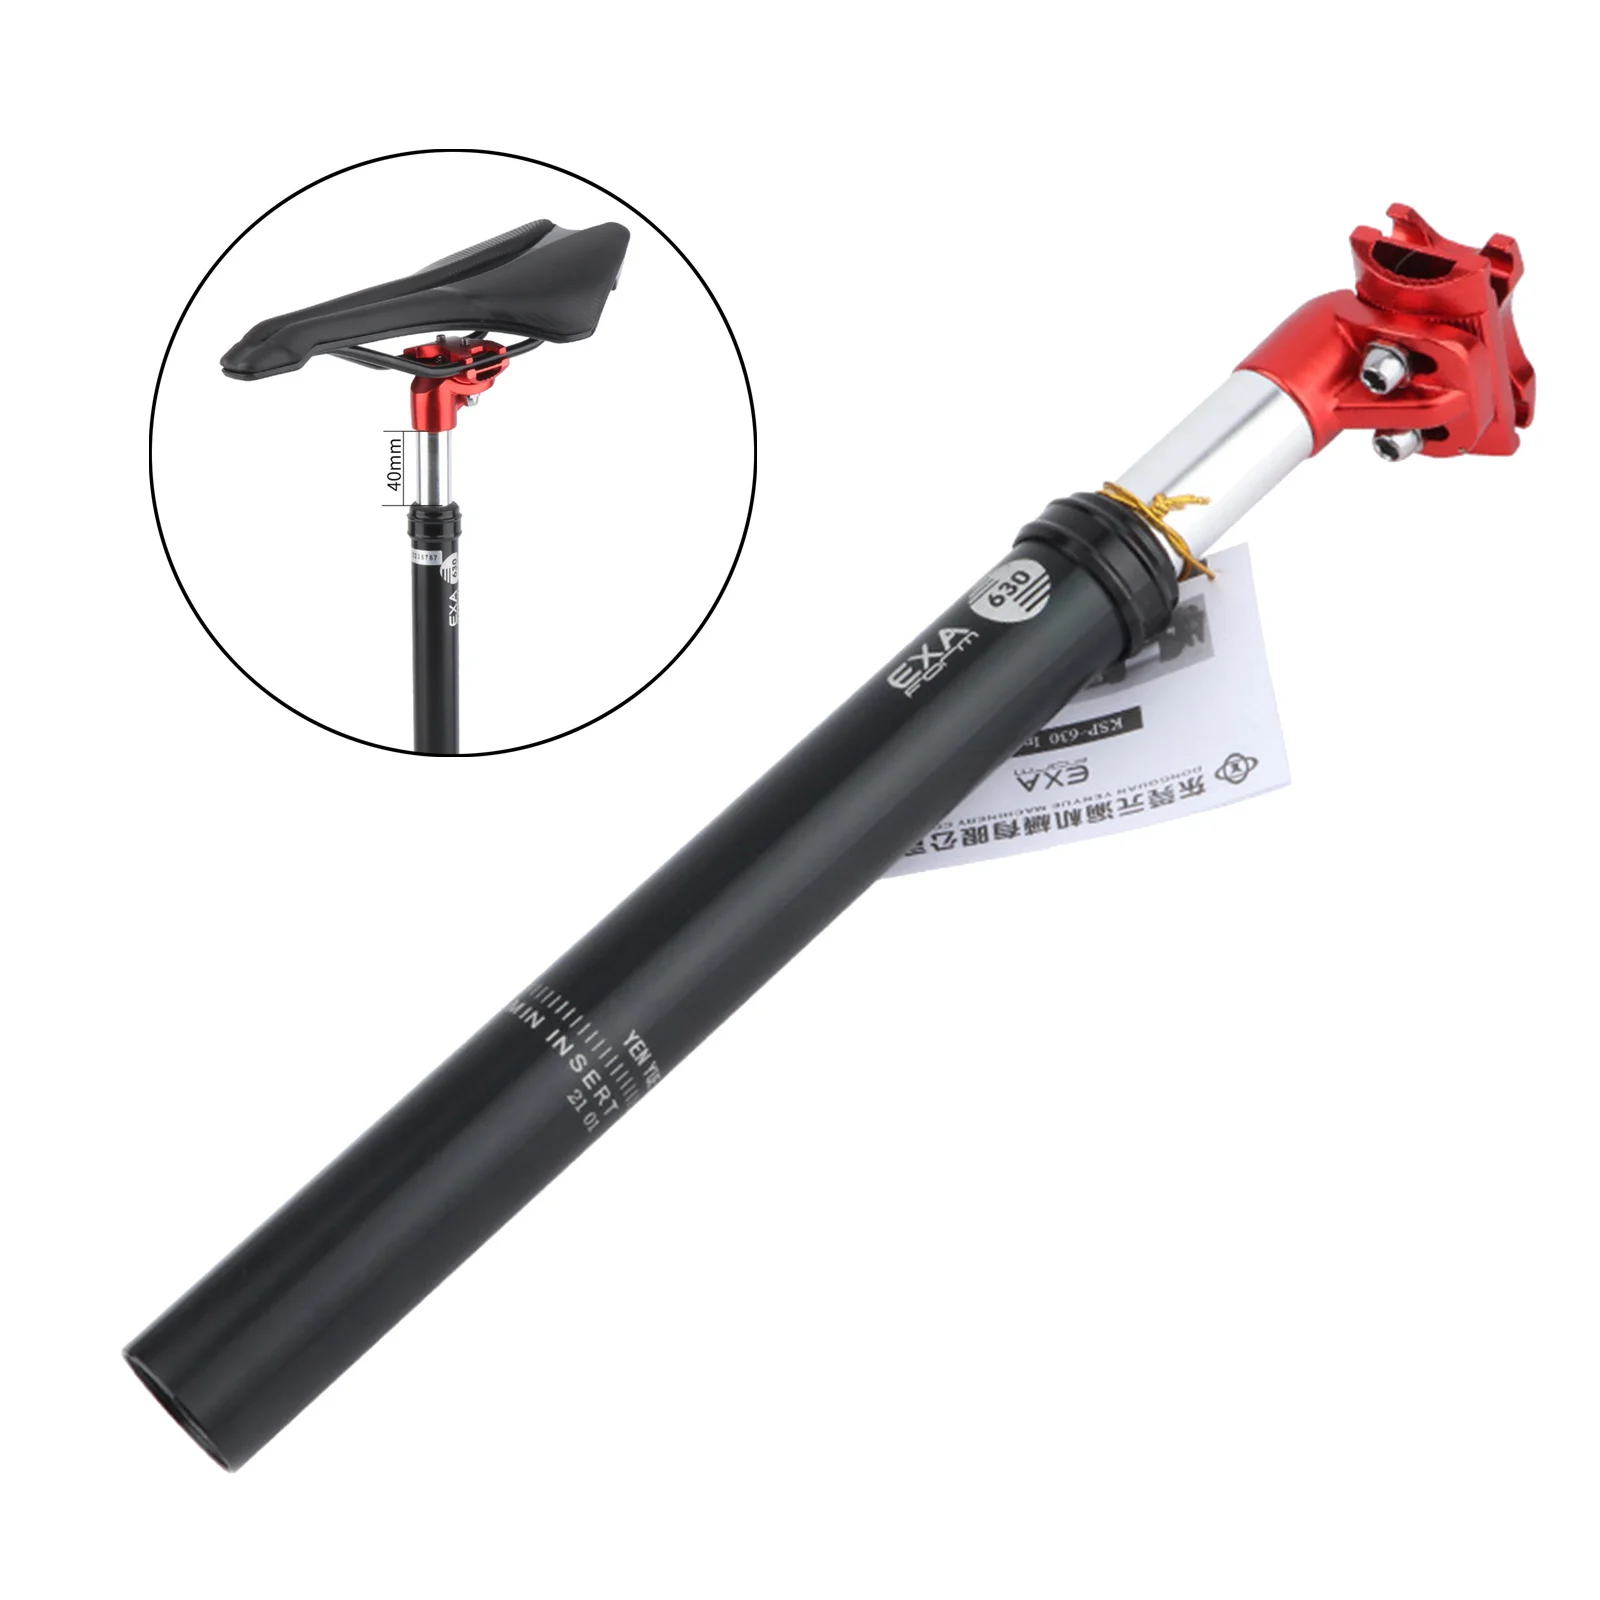 Road Bike Seatpost Shock Absorber Seat Post Saddle Pole Components Parts